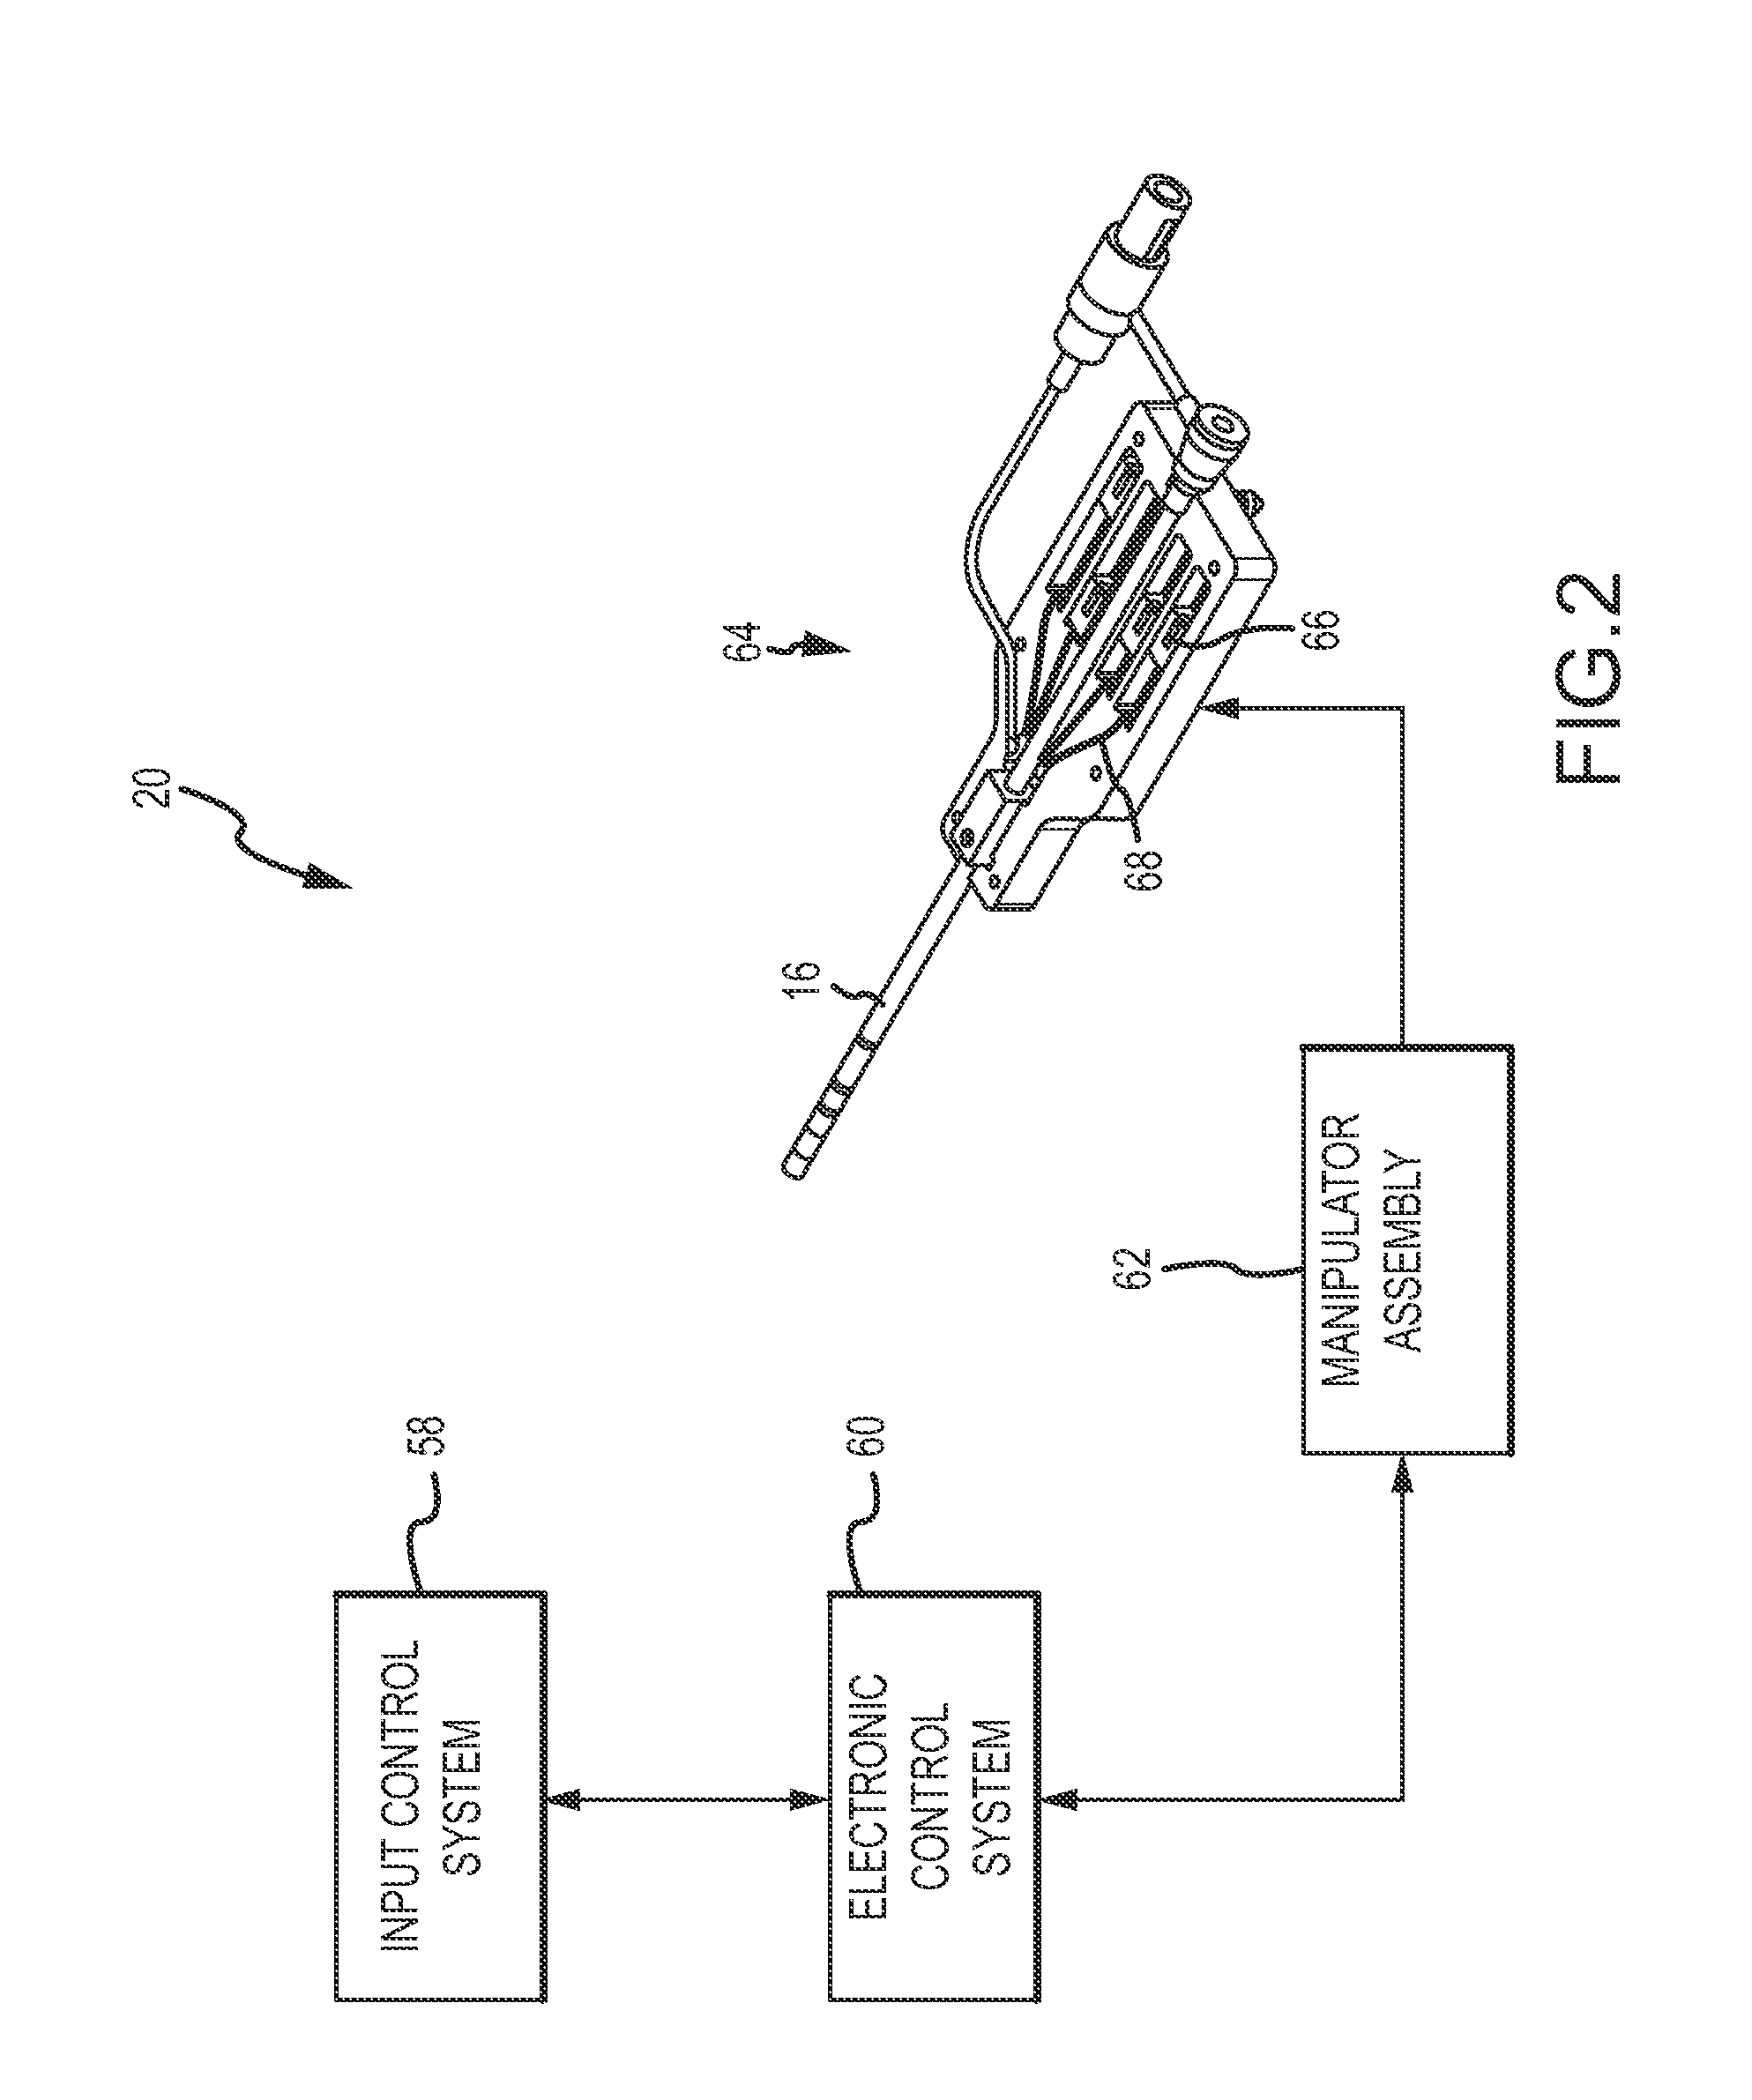 Catheter configuration interface and related system